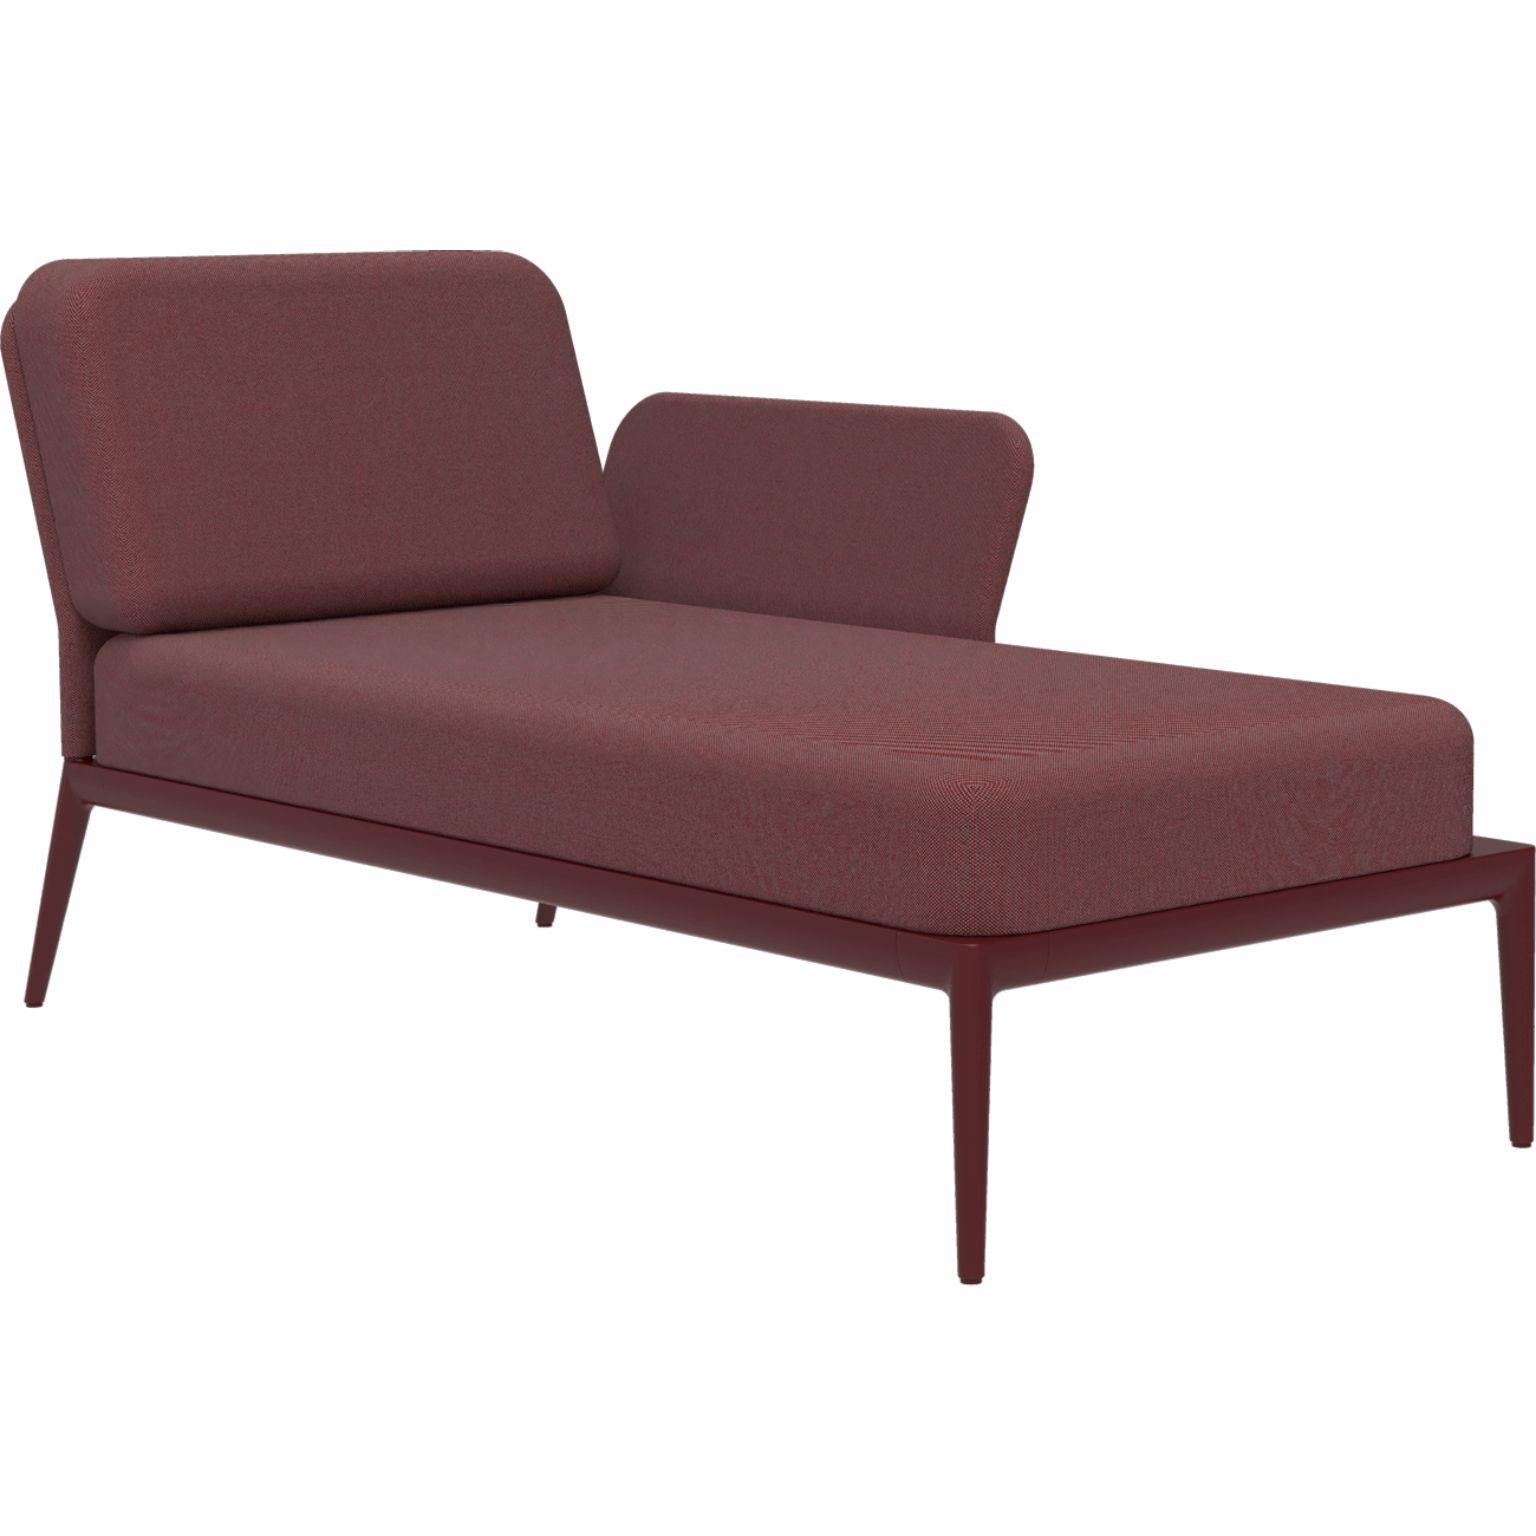 Cover Burgundy Left Chaise Longue by MOWEE
Dimensions: D80 x W155 x H81 cm (seat height 42 cm).
Material: Aluminum and upholstery.
Weight: 28 kg.
Also available in different colors and finishes. Please contact us.

An unmistakable collection